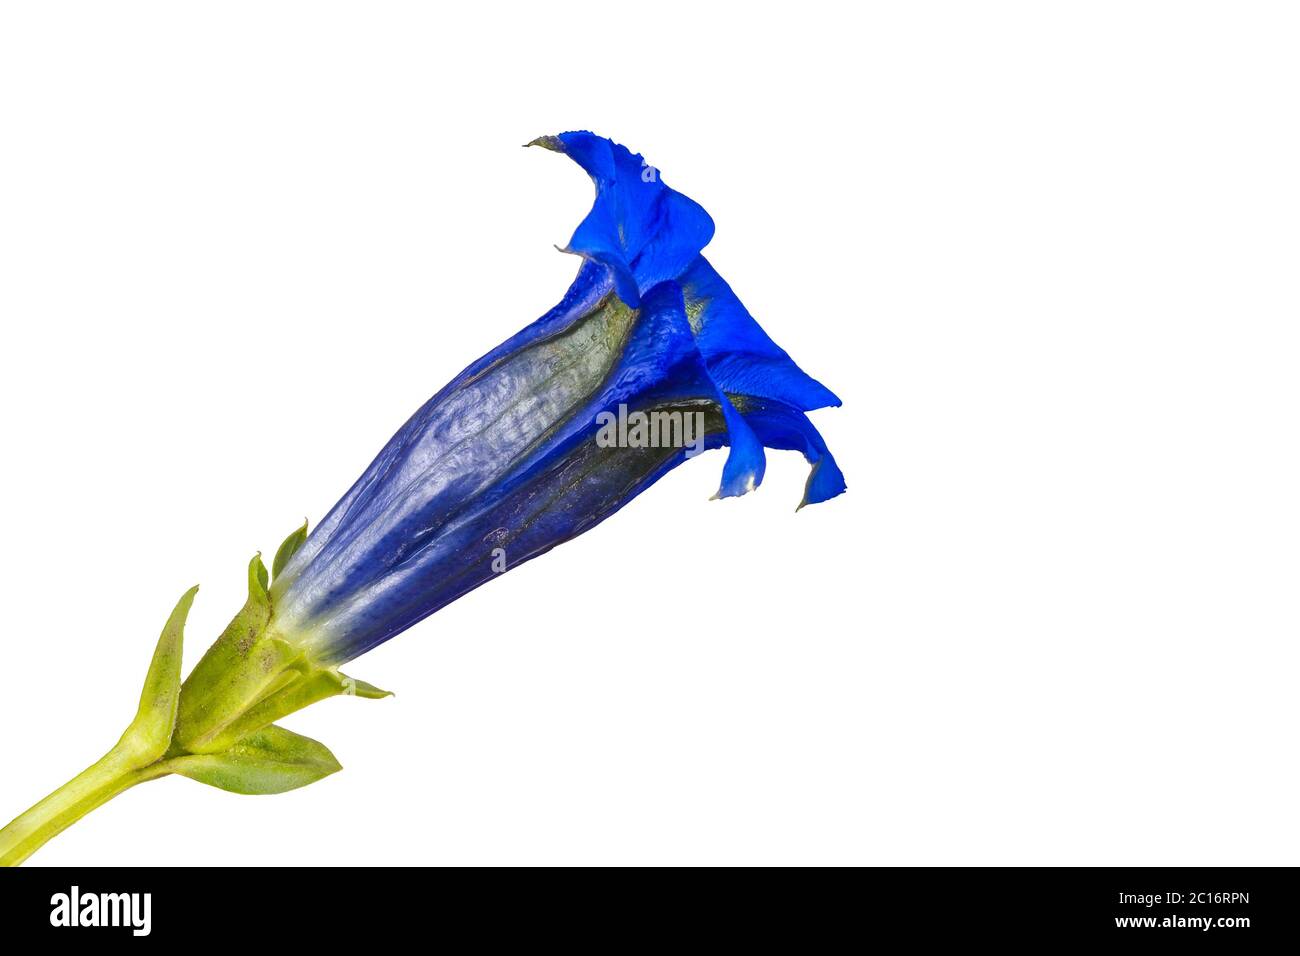 Gentiana flower on a white background Stock Photo